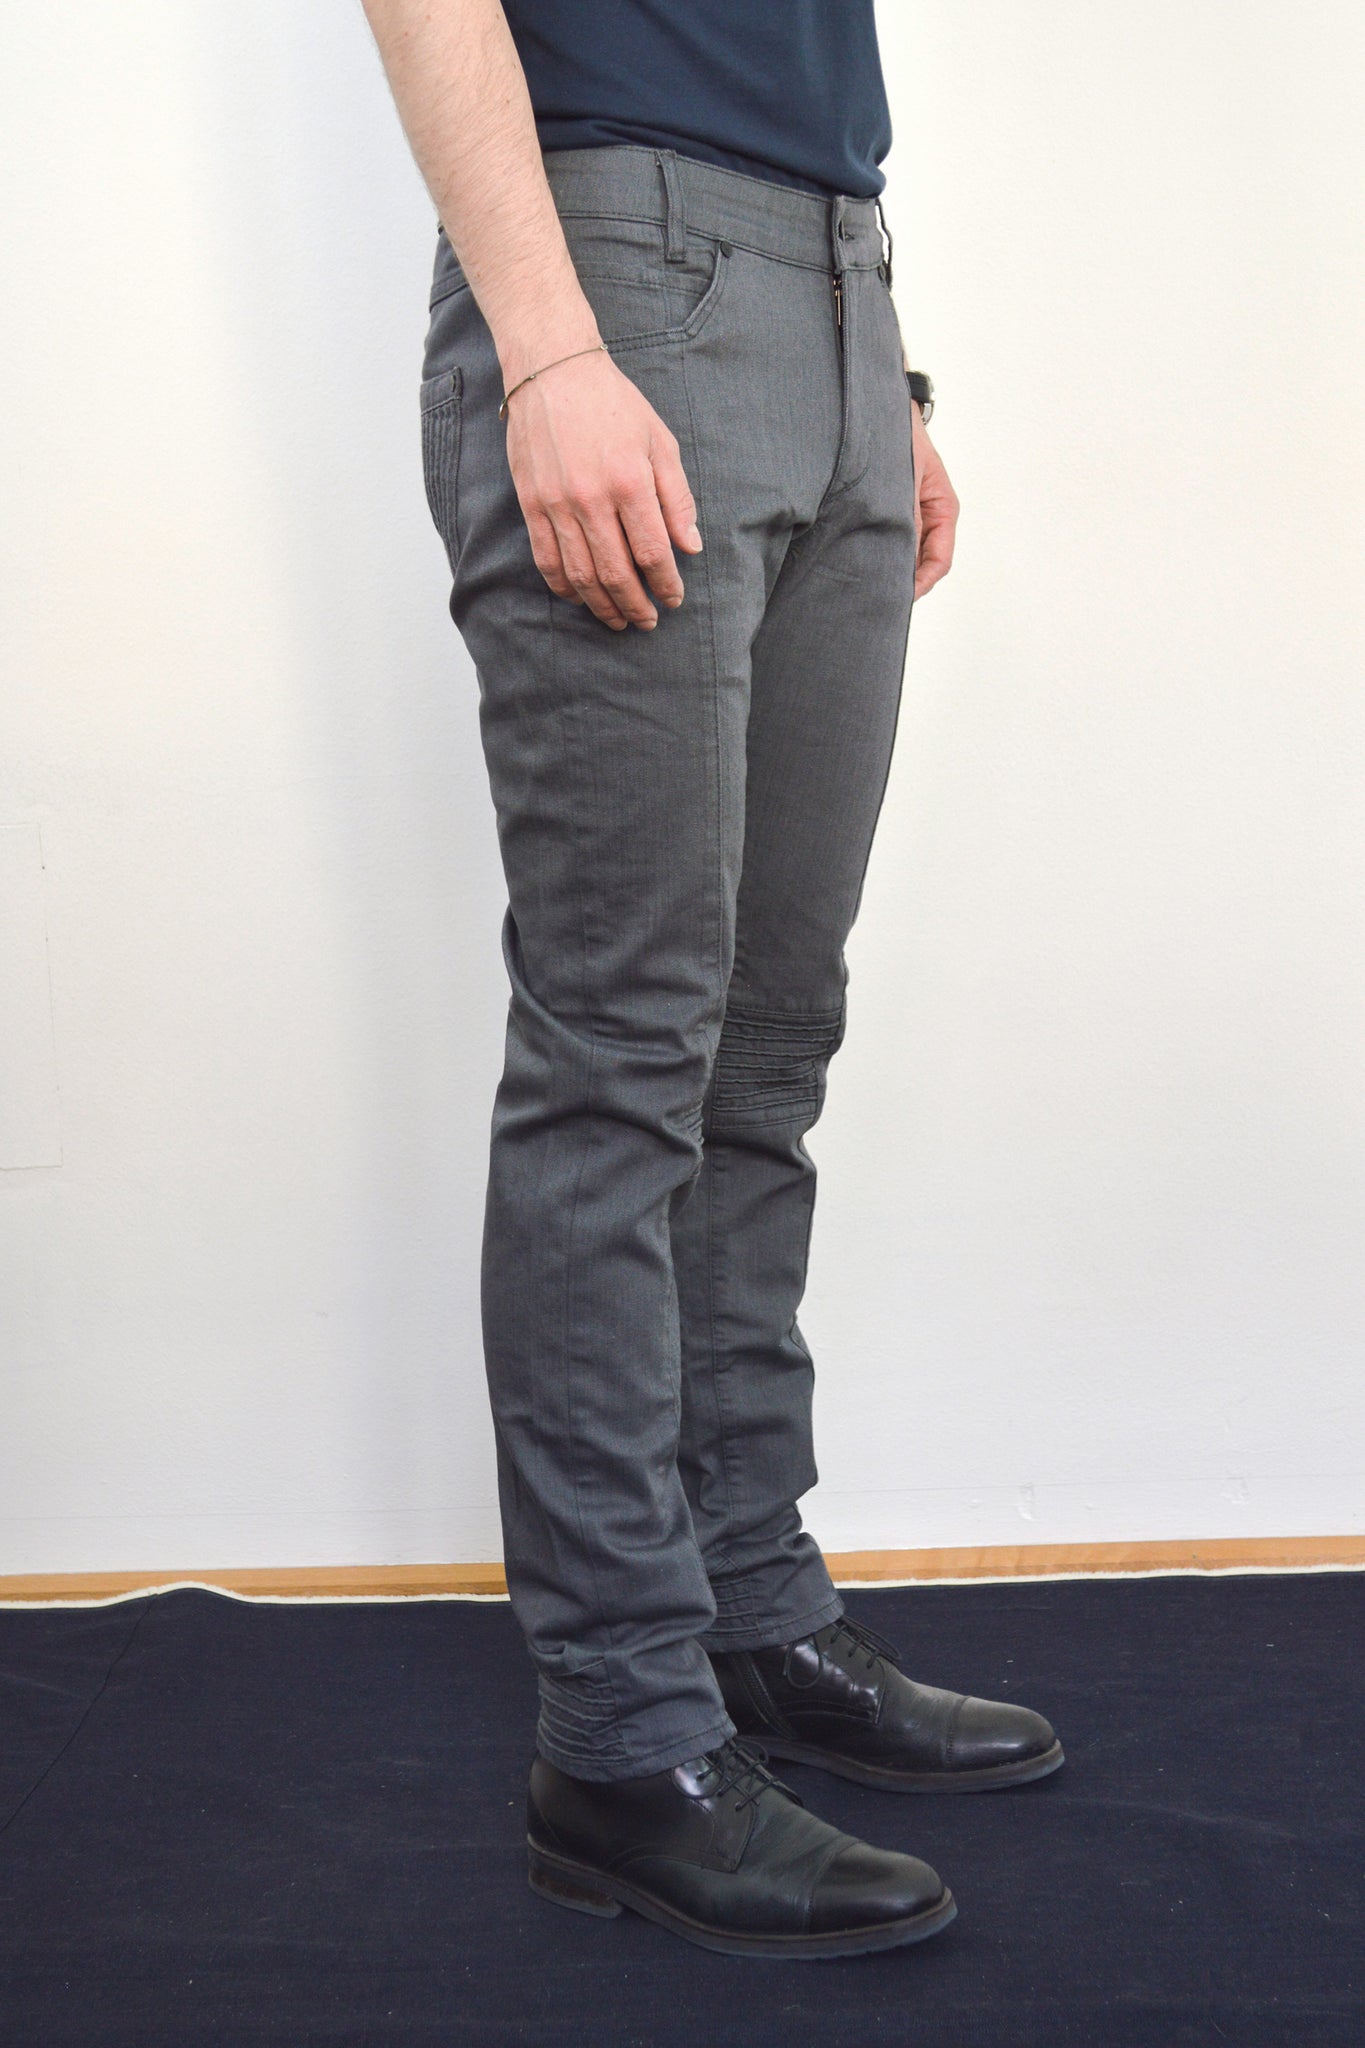 Second Choice - Francis Skinny Jeans Grey